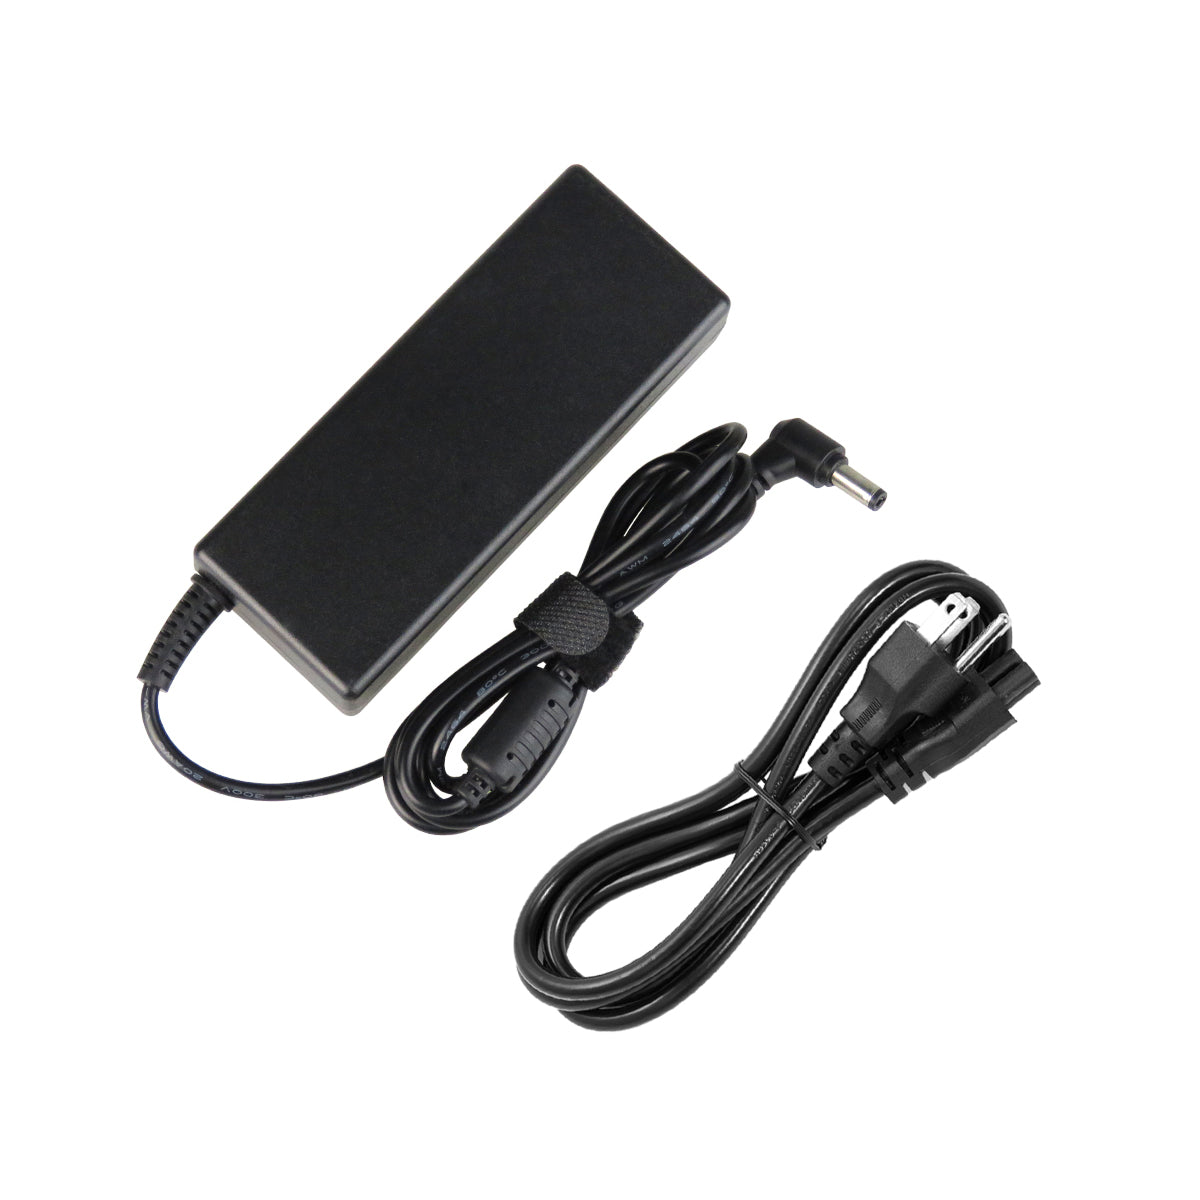 AC Adapter Charger for ASUS K45N Notebook.